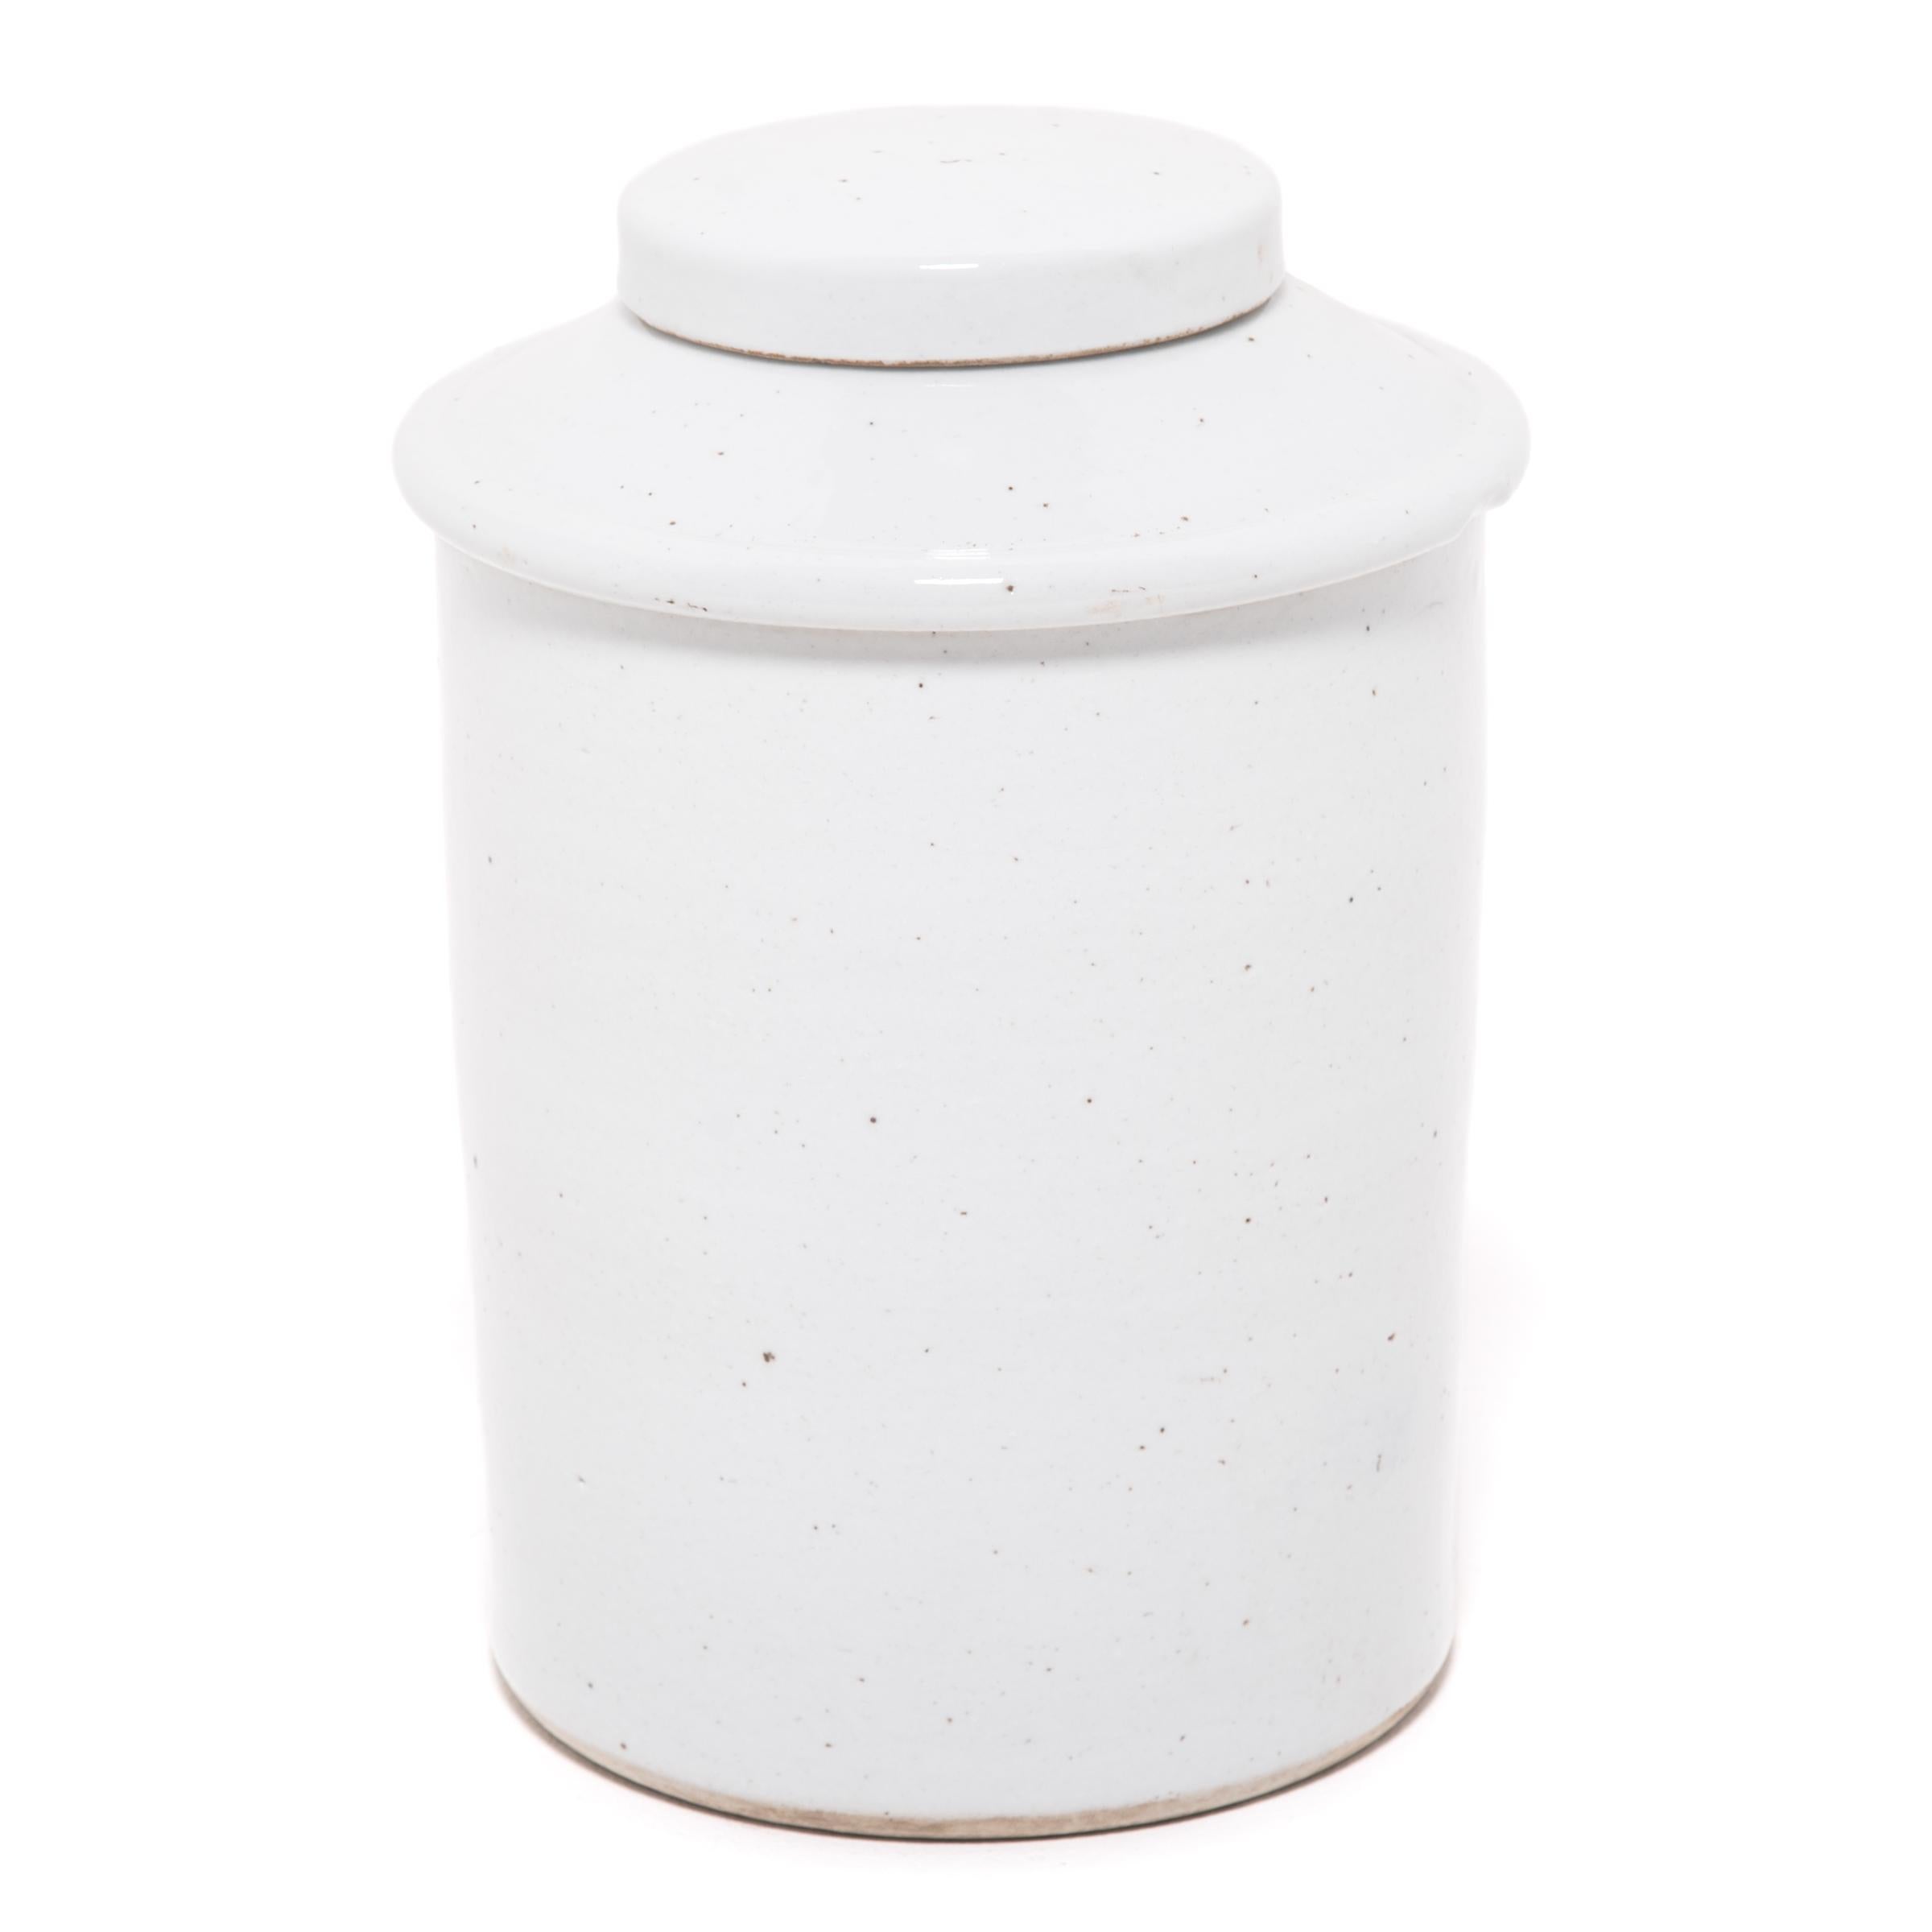 Rendered in a striking white glaze, this contemporary porcelain jar offers a modern take on a Classic form. Lidded jars like these were used in tea shops in China, where tea drinking was a symbol of taste and upper-class refinement.

Additional